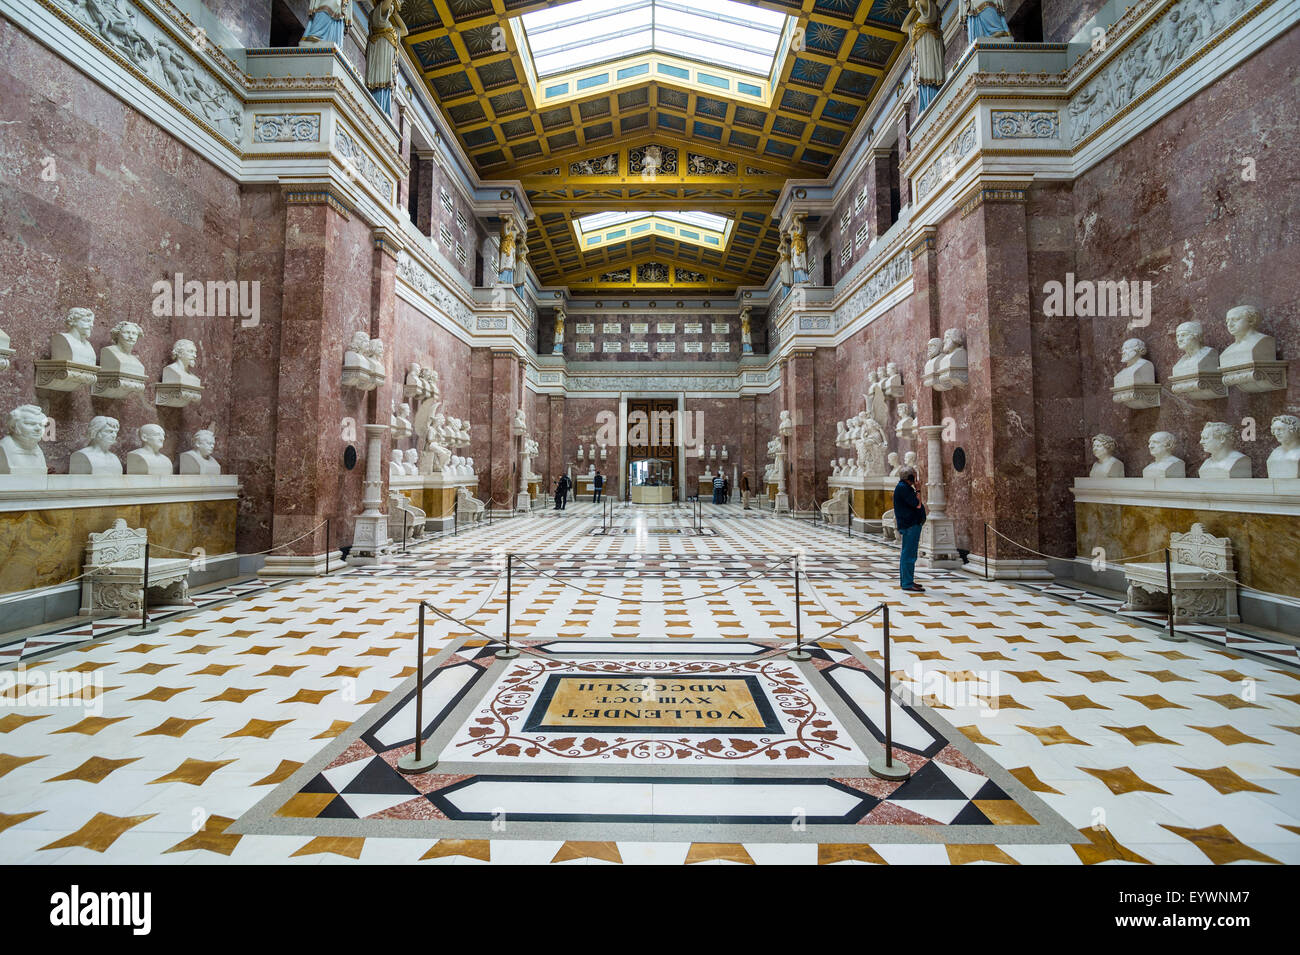 Interior of the Neo-classical Walhalla hall of fame on the Danube. Bavaria, Germany, Europe Stock Photo